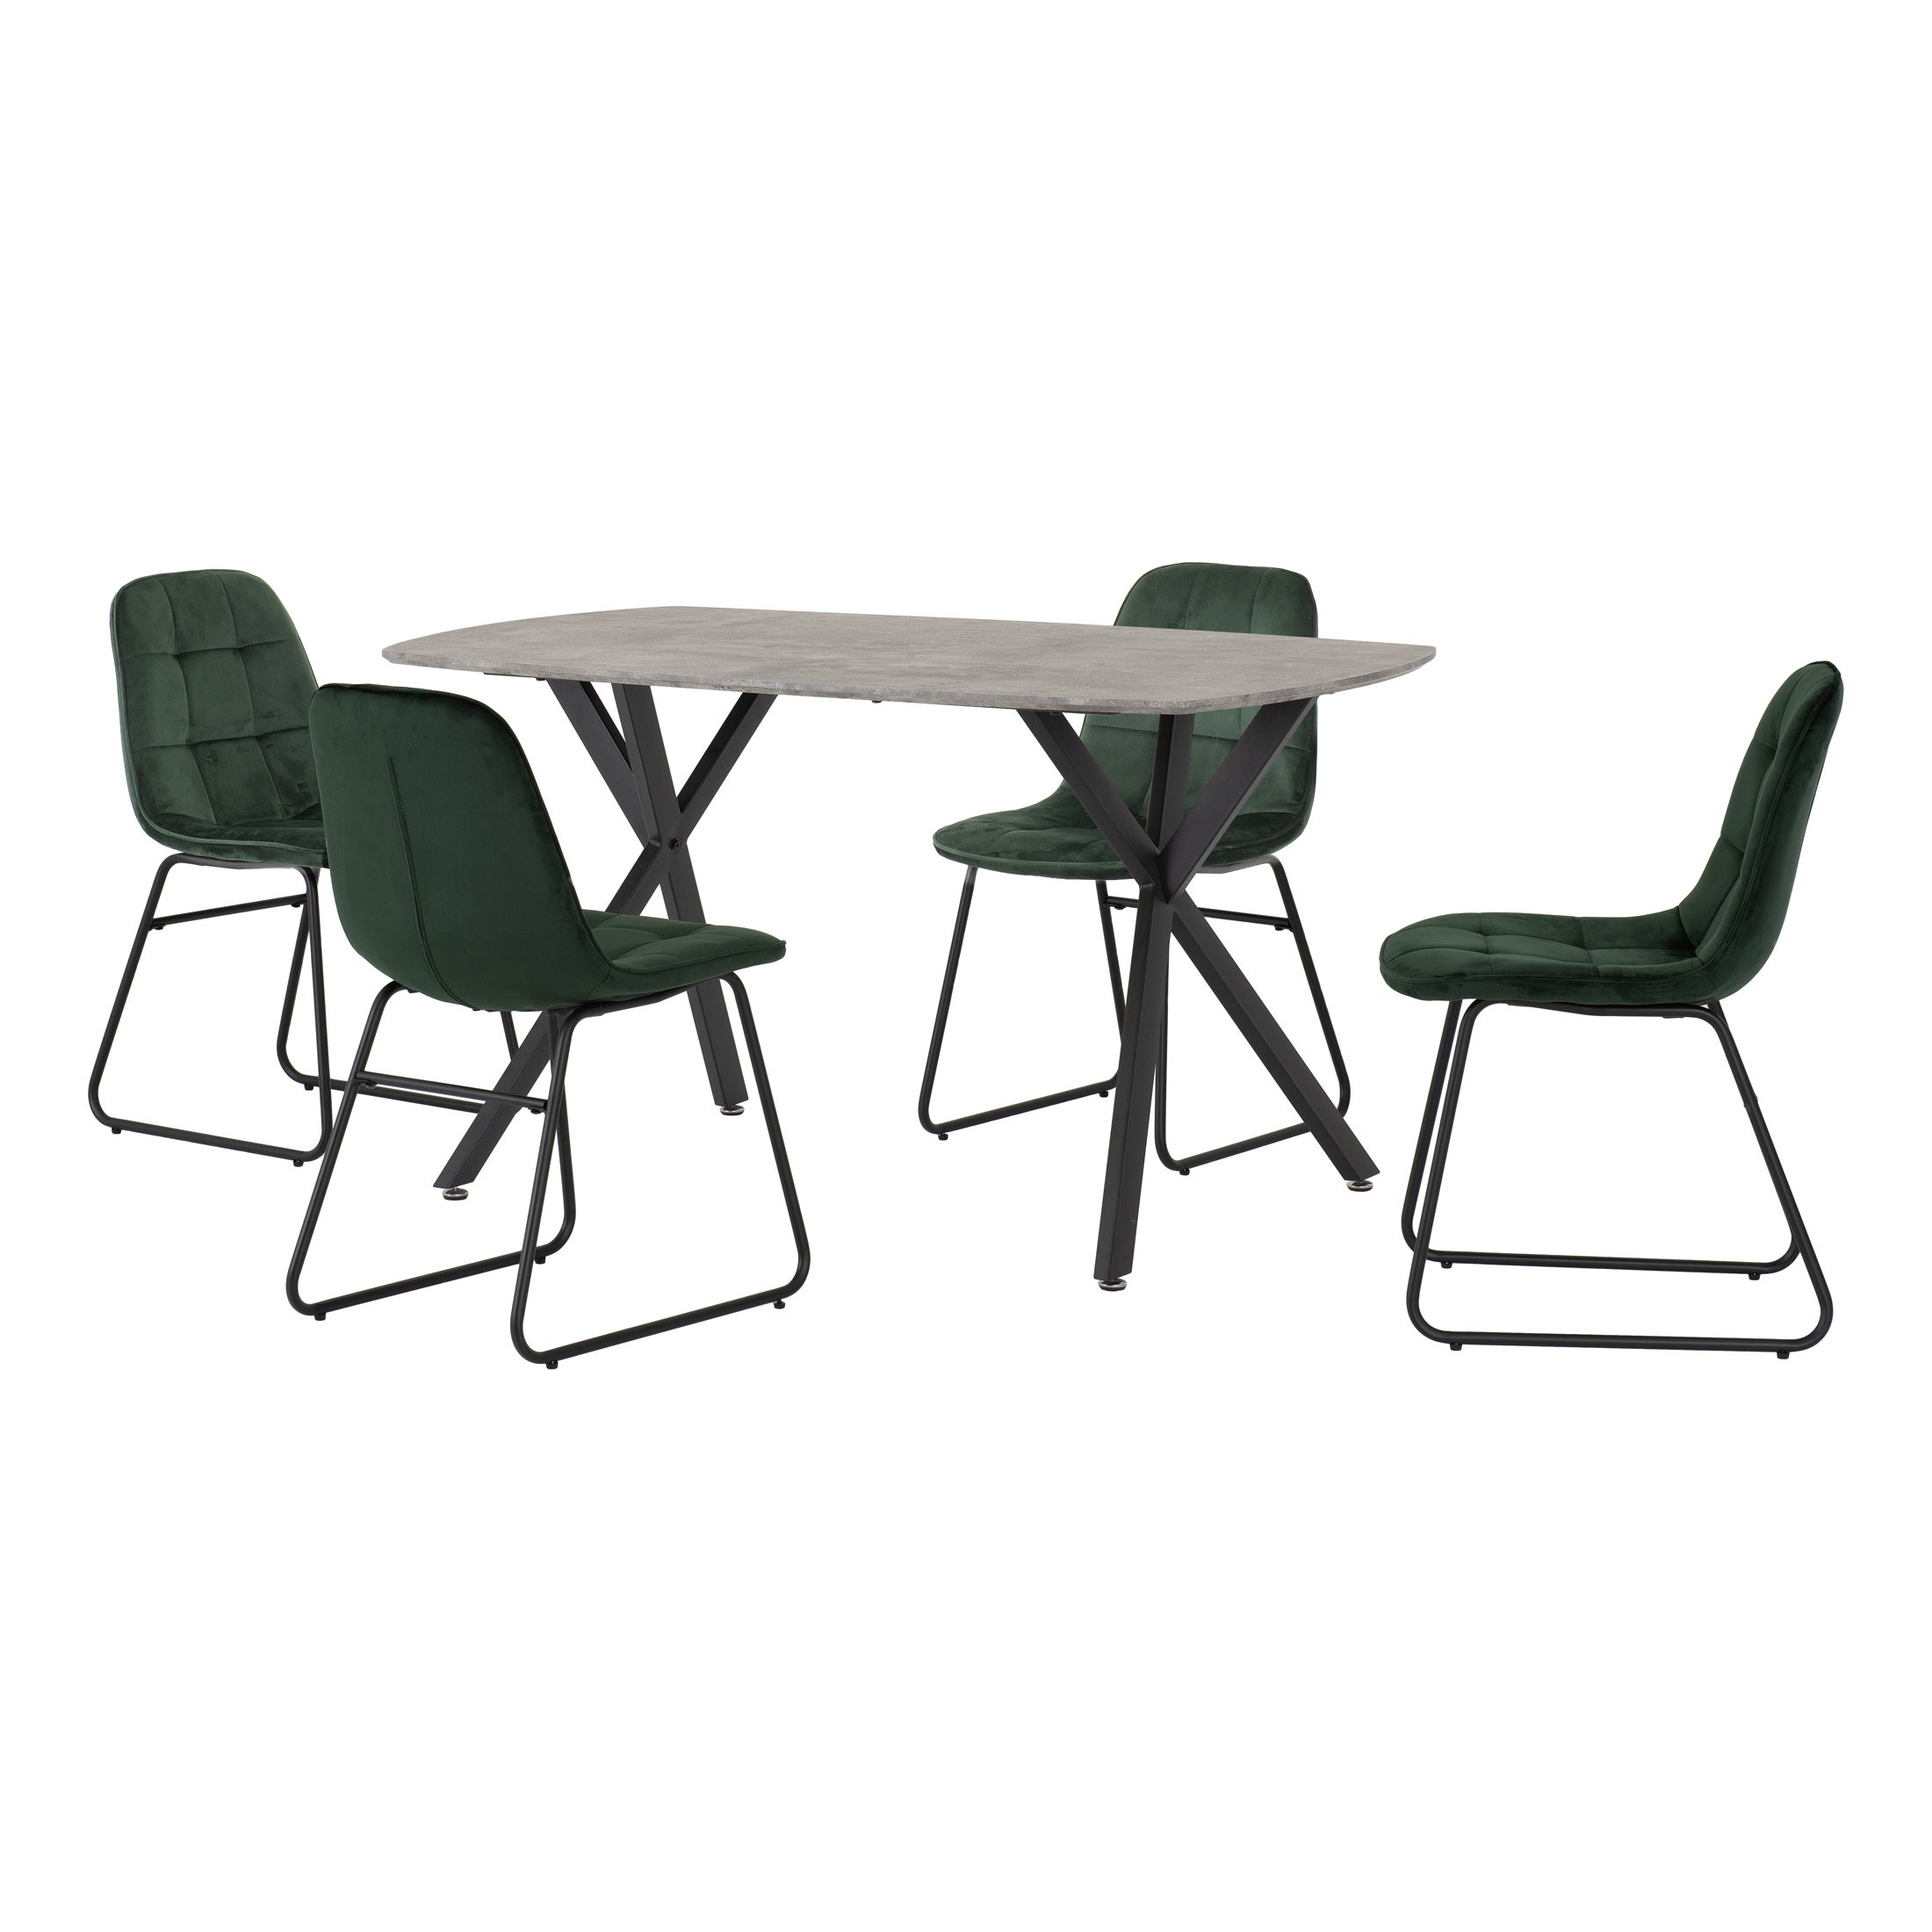 Athens Rectangular Dining Table With 4 Lukas Chairs Concrete Effect Green